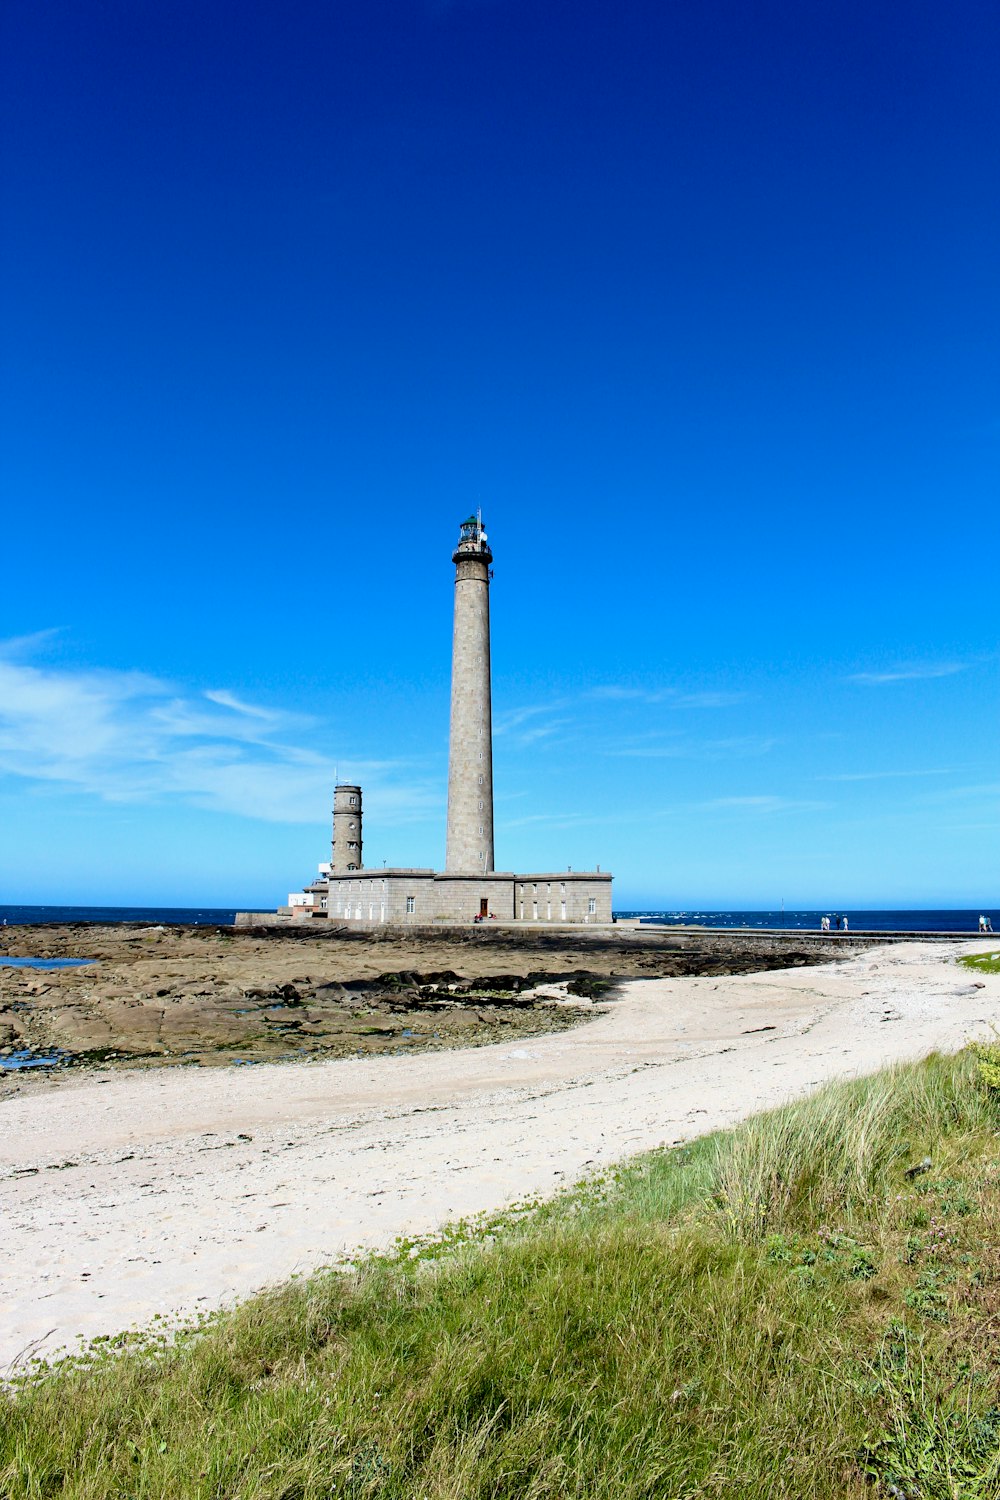 white and brown lighthouse near blue sea under blue sky during daytime